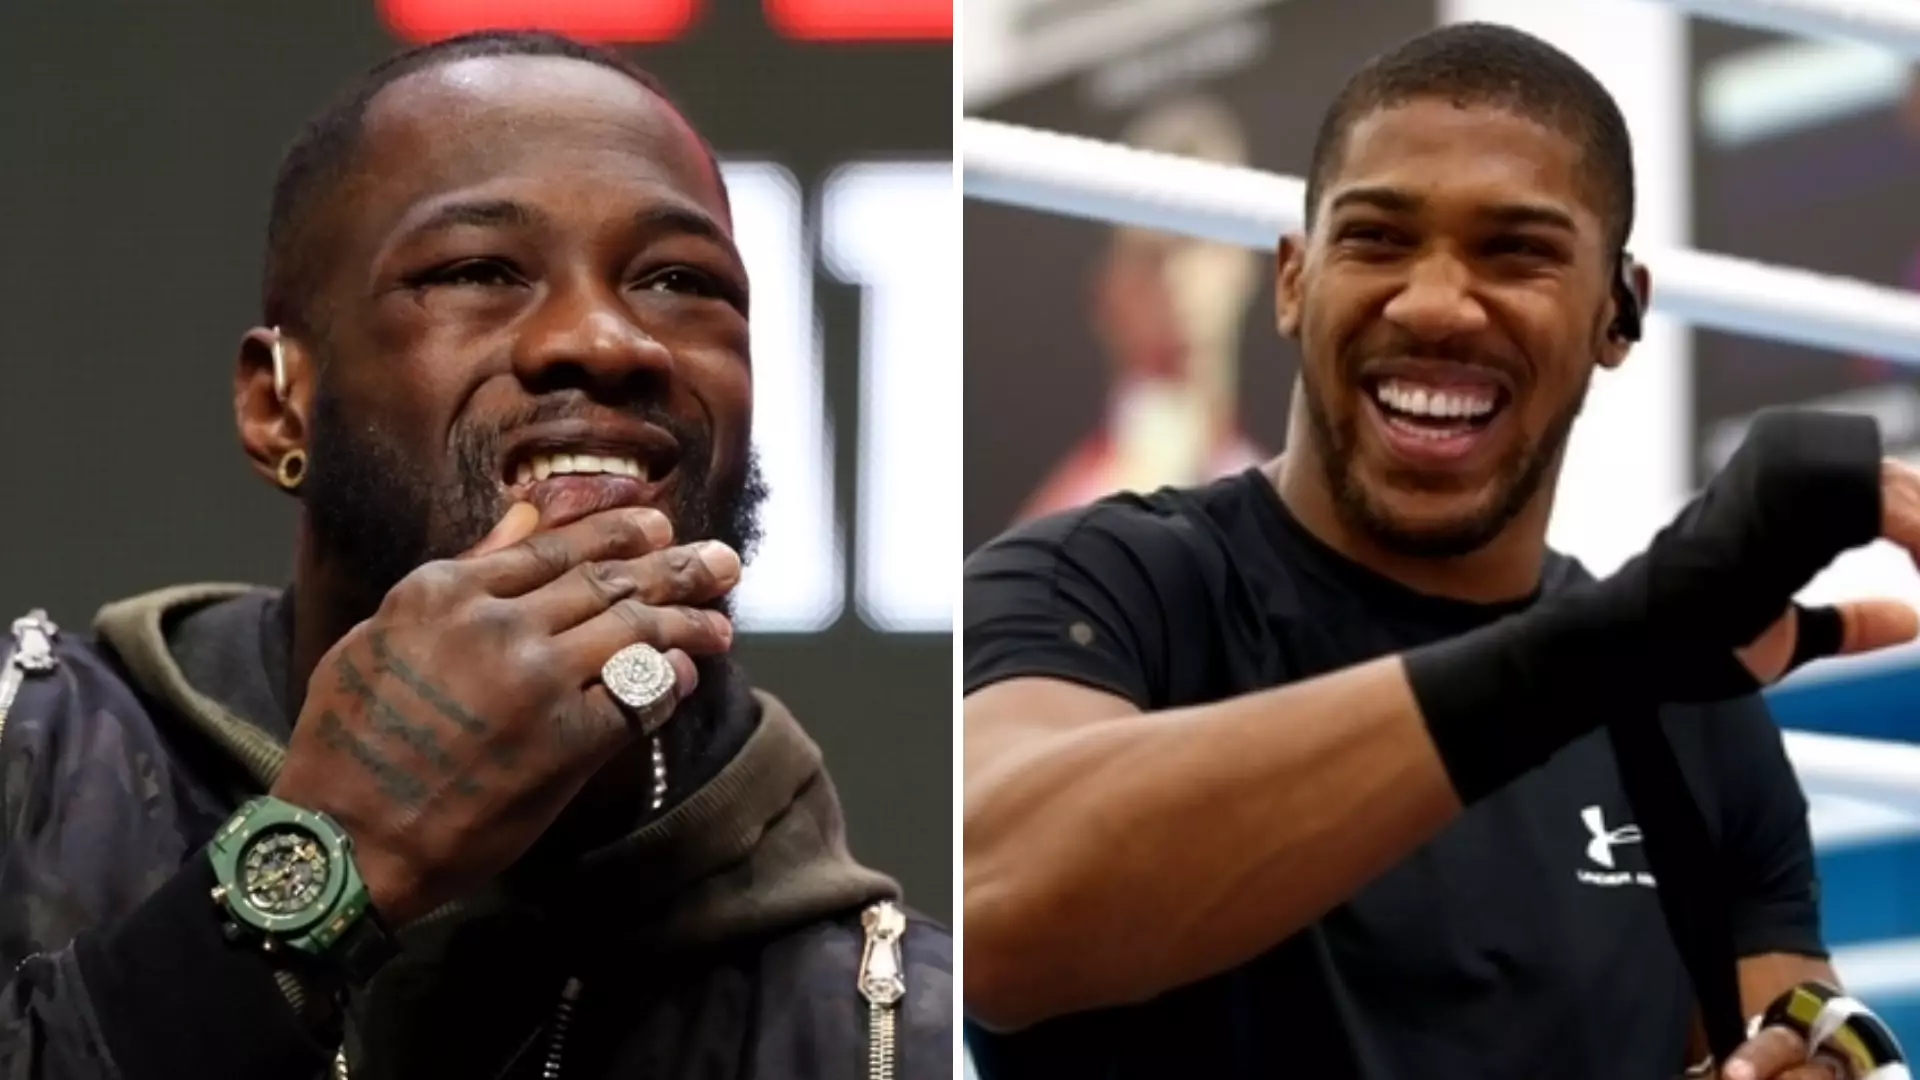 Anthony Joshua Drops A Cheeky Swipe At Deontay Wilder After Tyson Fury Defeat